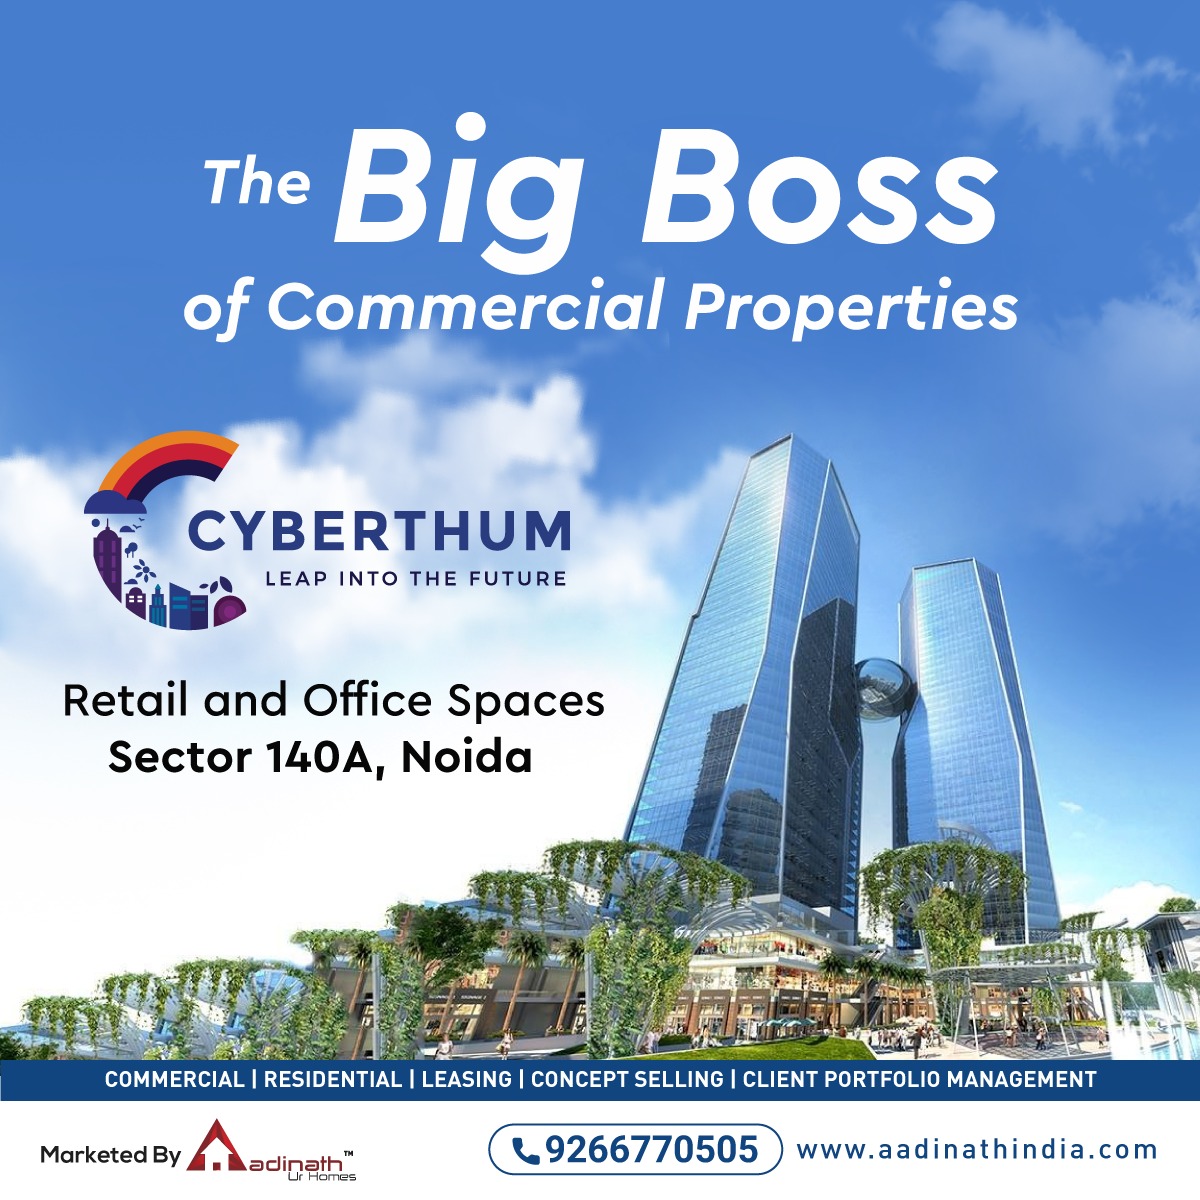 Discover Cyberthum - premium commercial spaces by Aadinath Ur Homes in Sector 140A, Noida.
#AadinathUrHomes #Cyberthum #Sector140A #Noida #CommercialProperties #BusinessHub #InnovationCenter #ConnectNow #InvestInYourFuture #PrimeLocation #DynamicSpaces #AadinathIndia